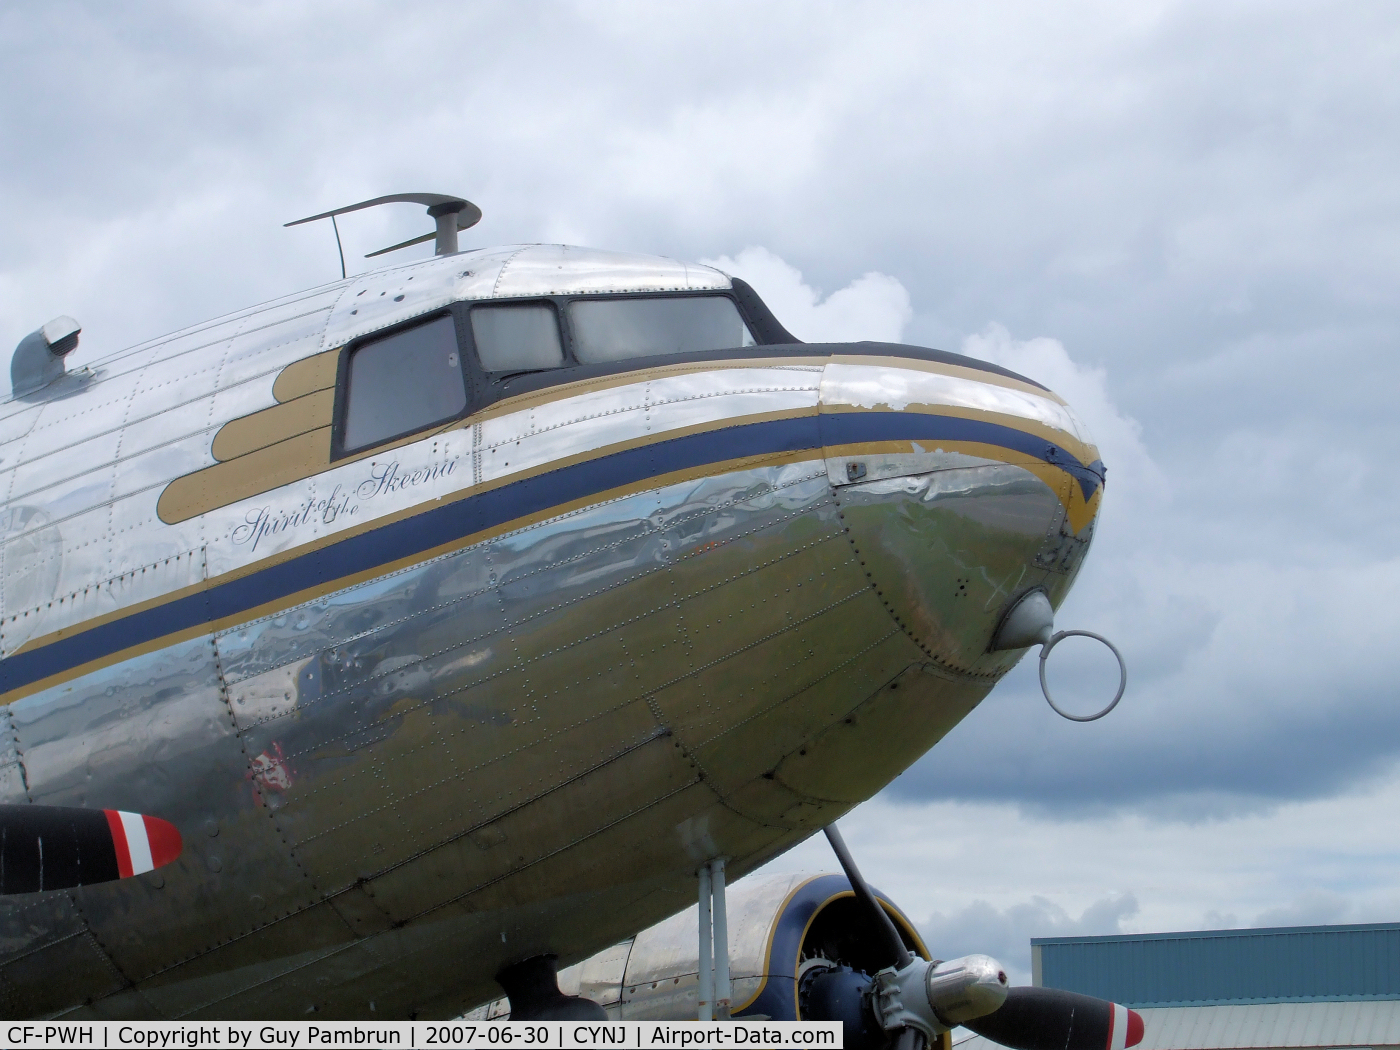 CF-PWH, 1940 Douglas C-49H-DO C/N 2198, On museum display. Follow website link for info